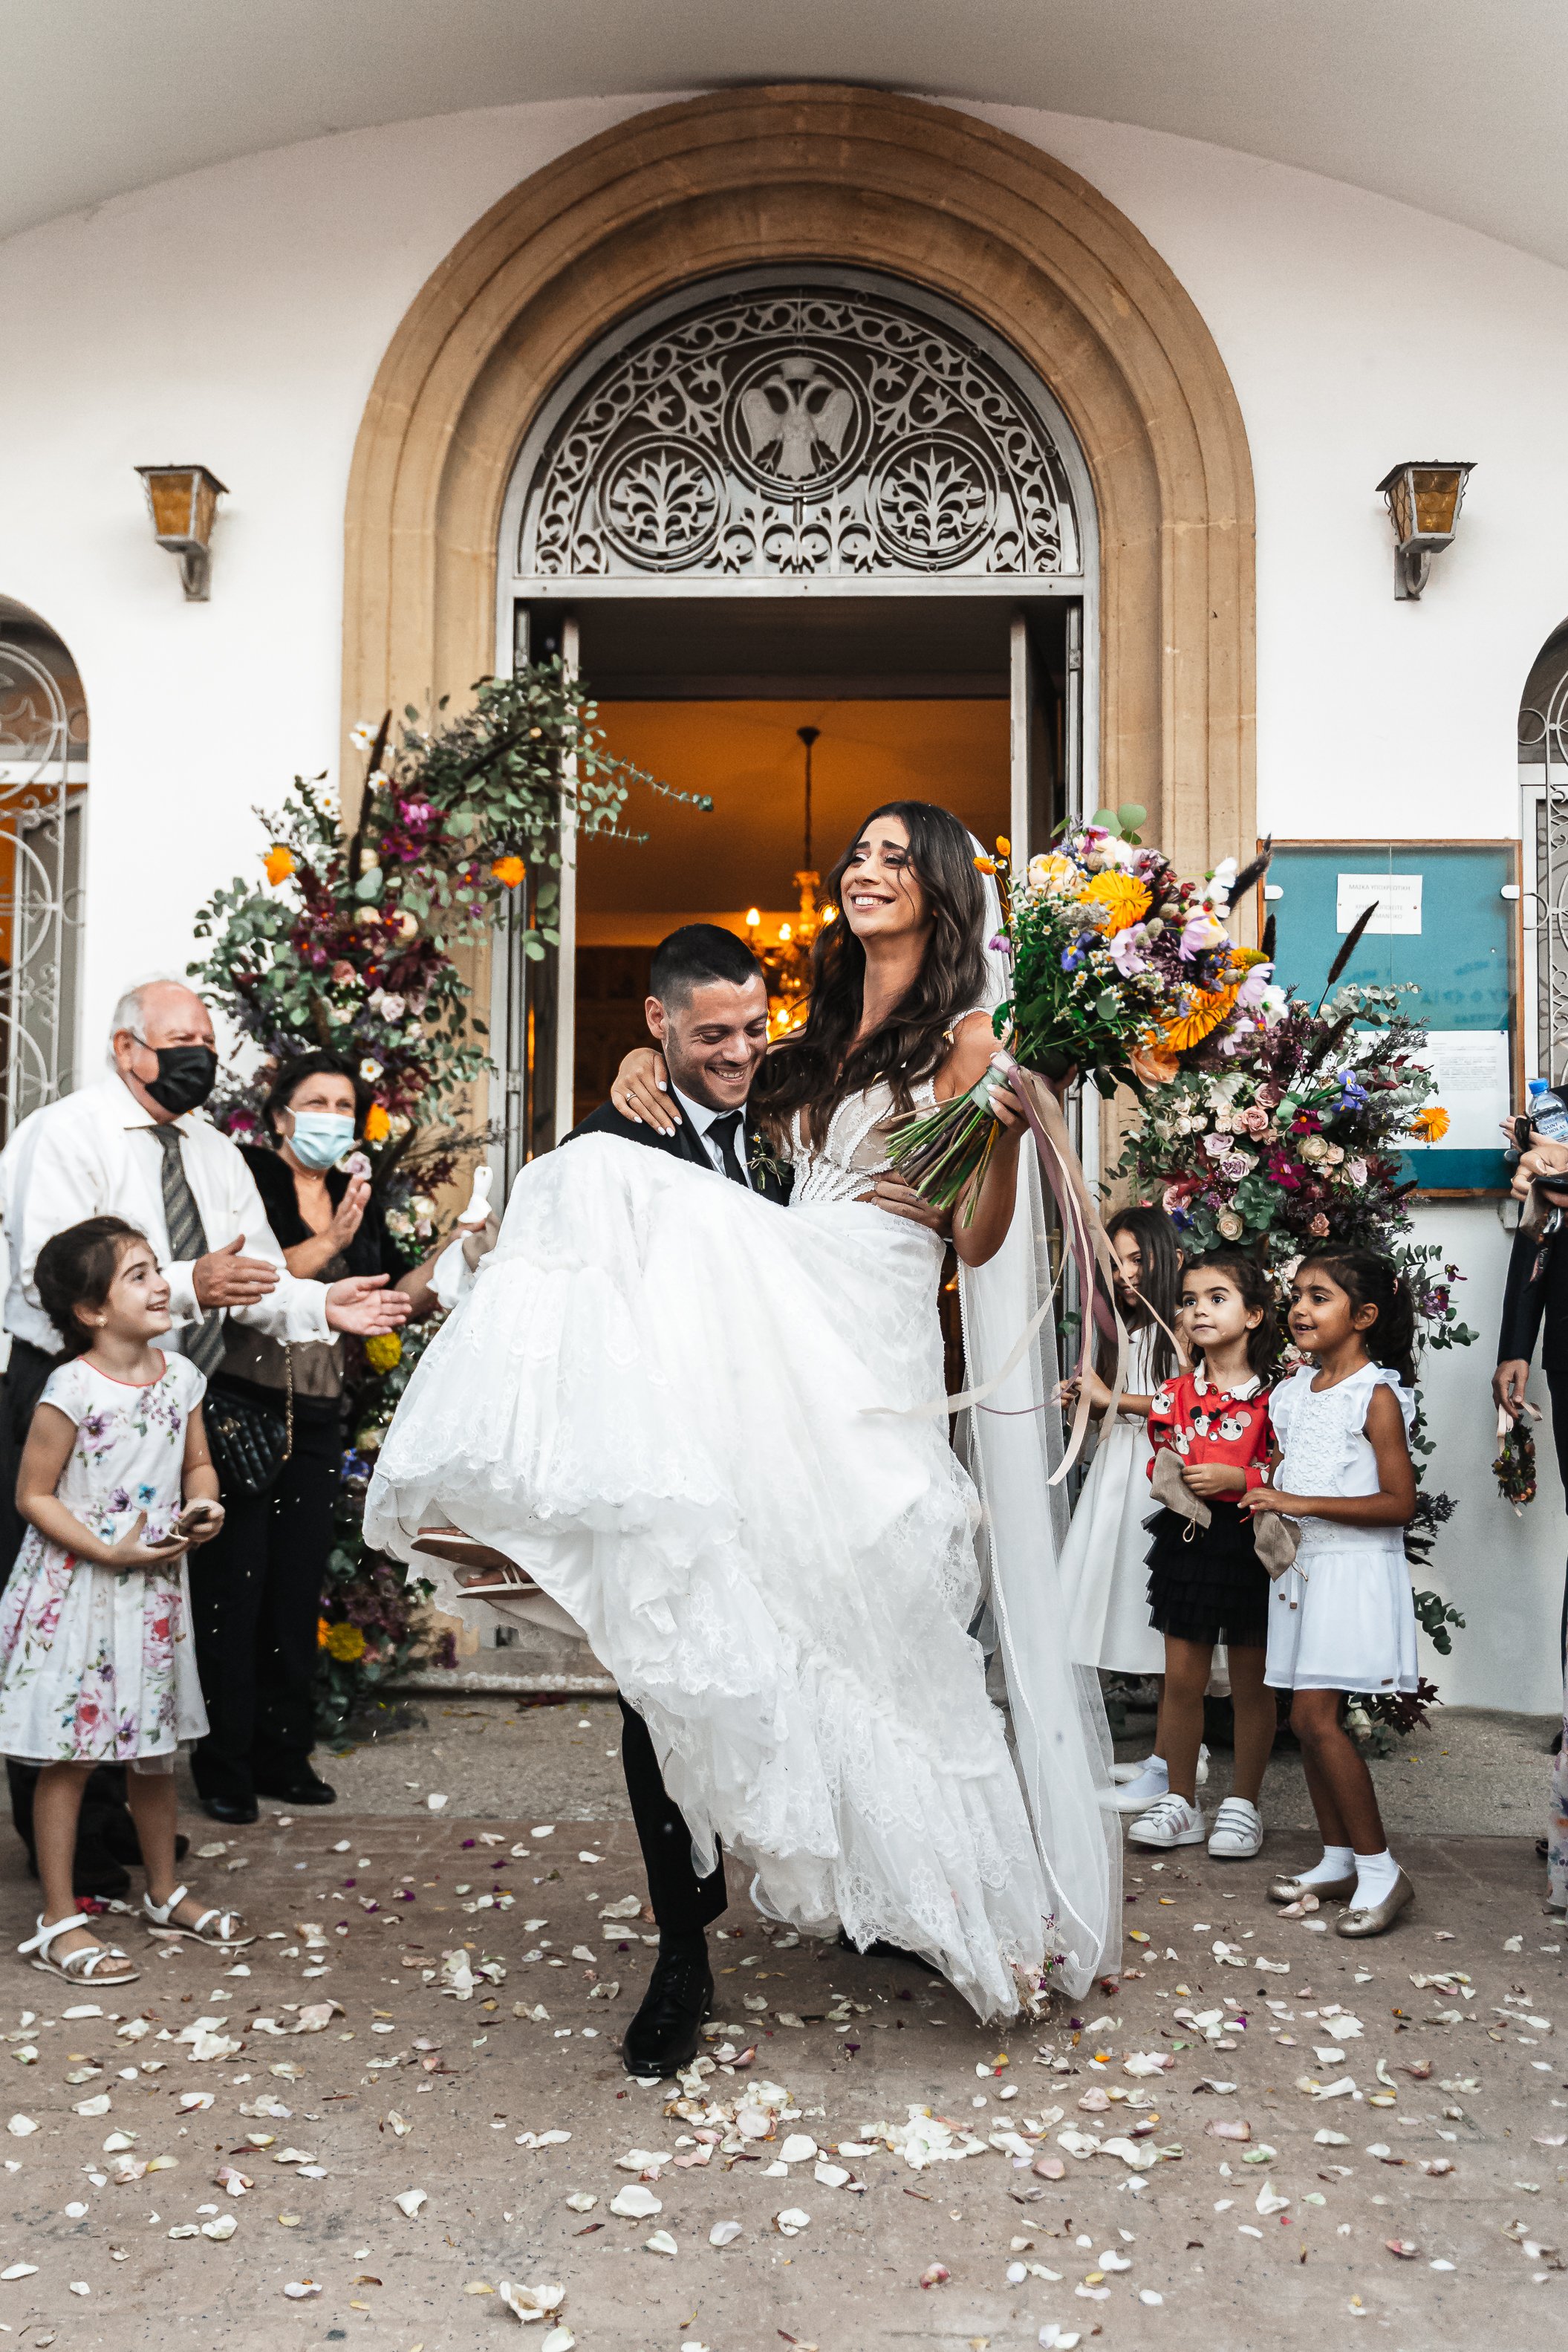 Elegant image of the couple's wedding celebration in the warm Cypriot sun